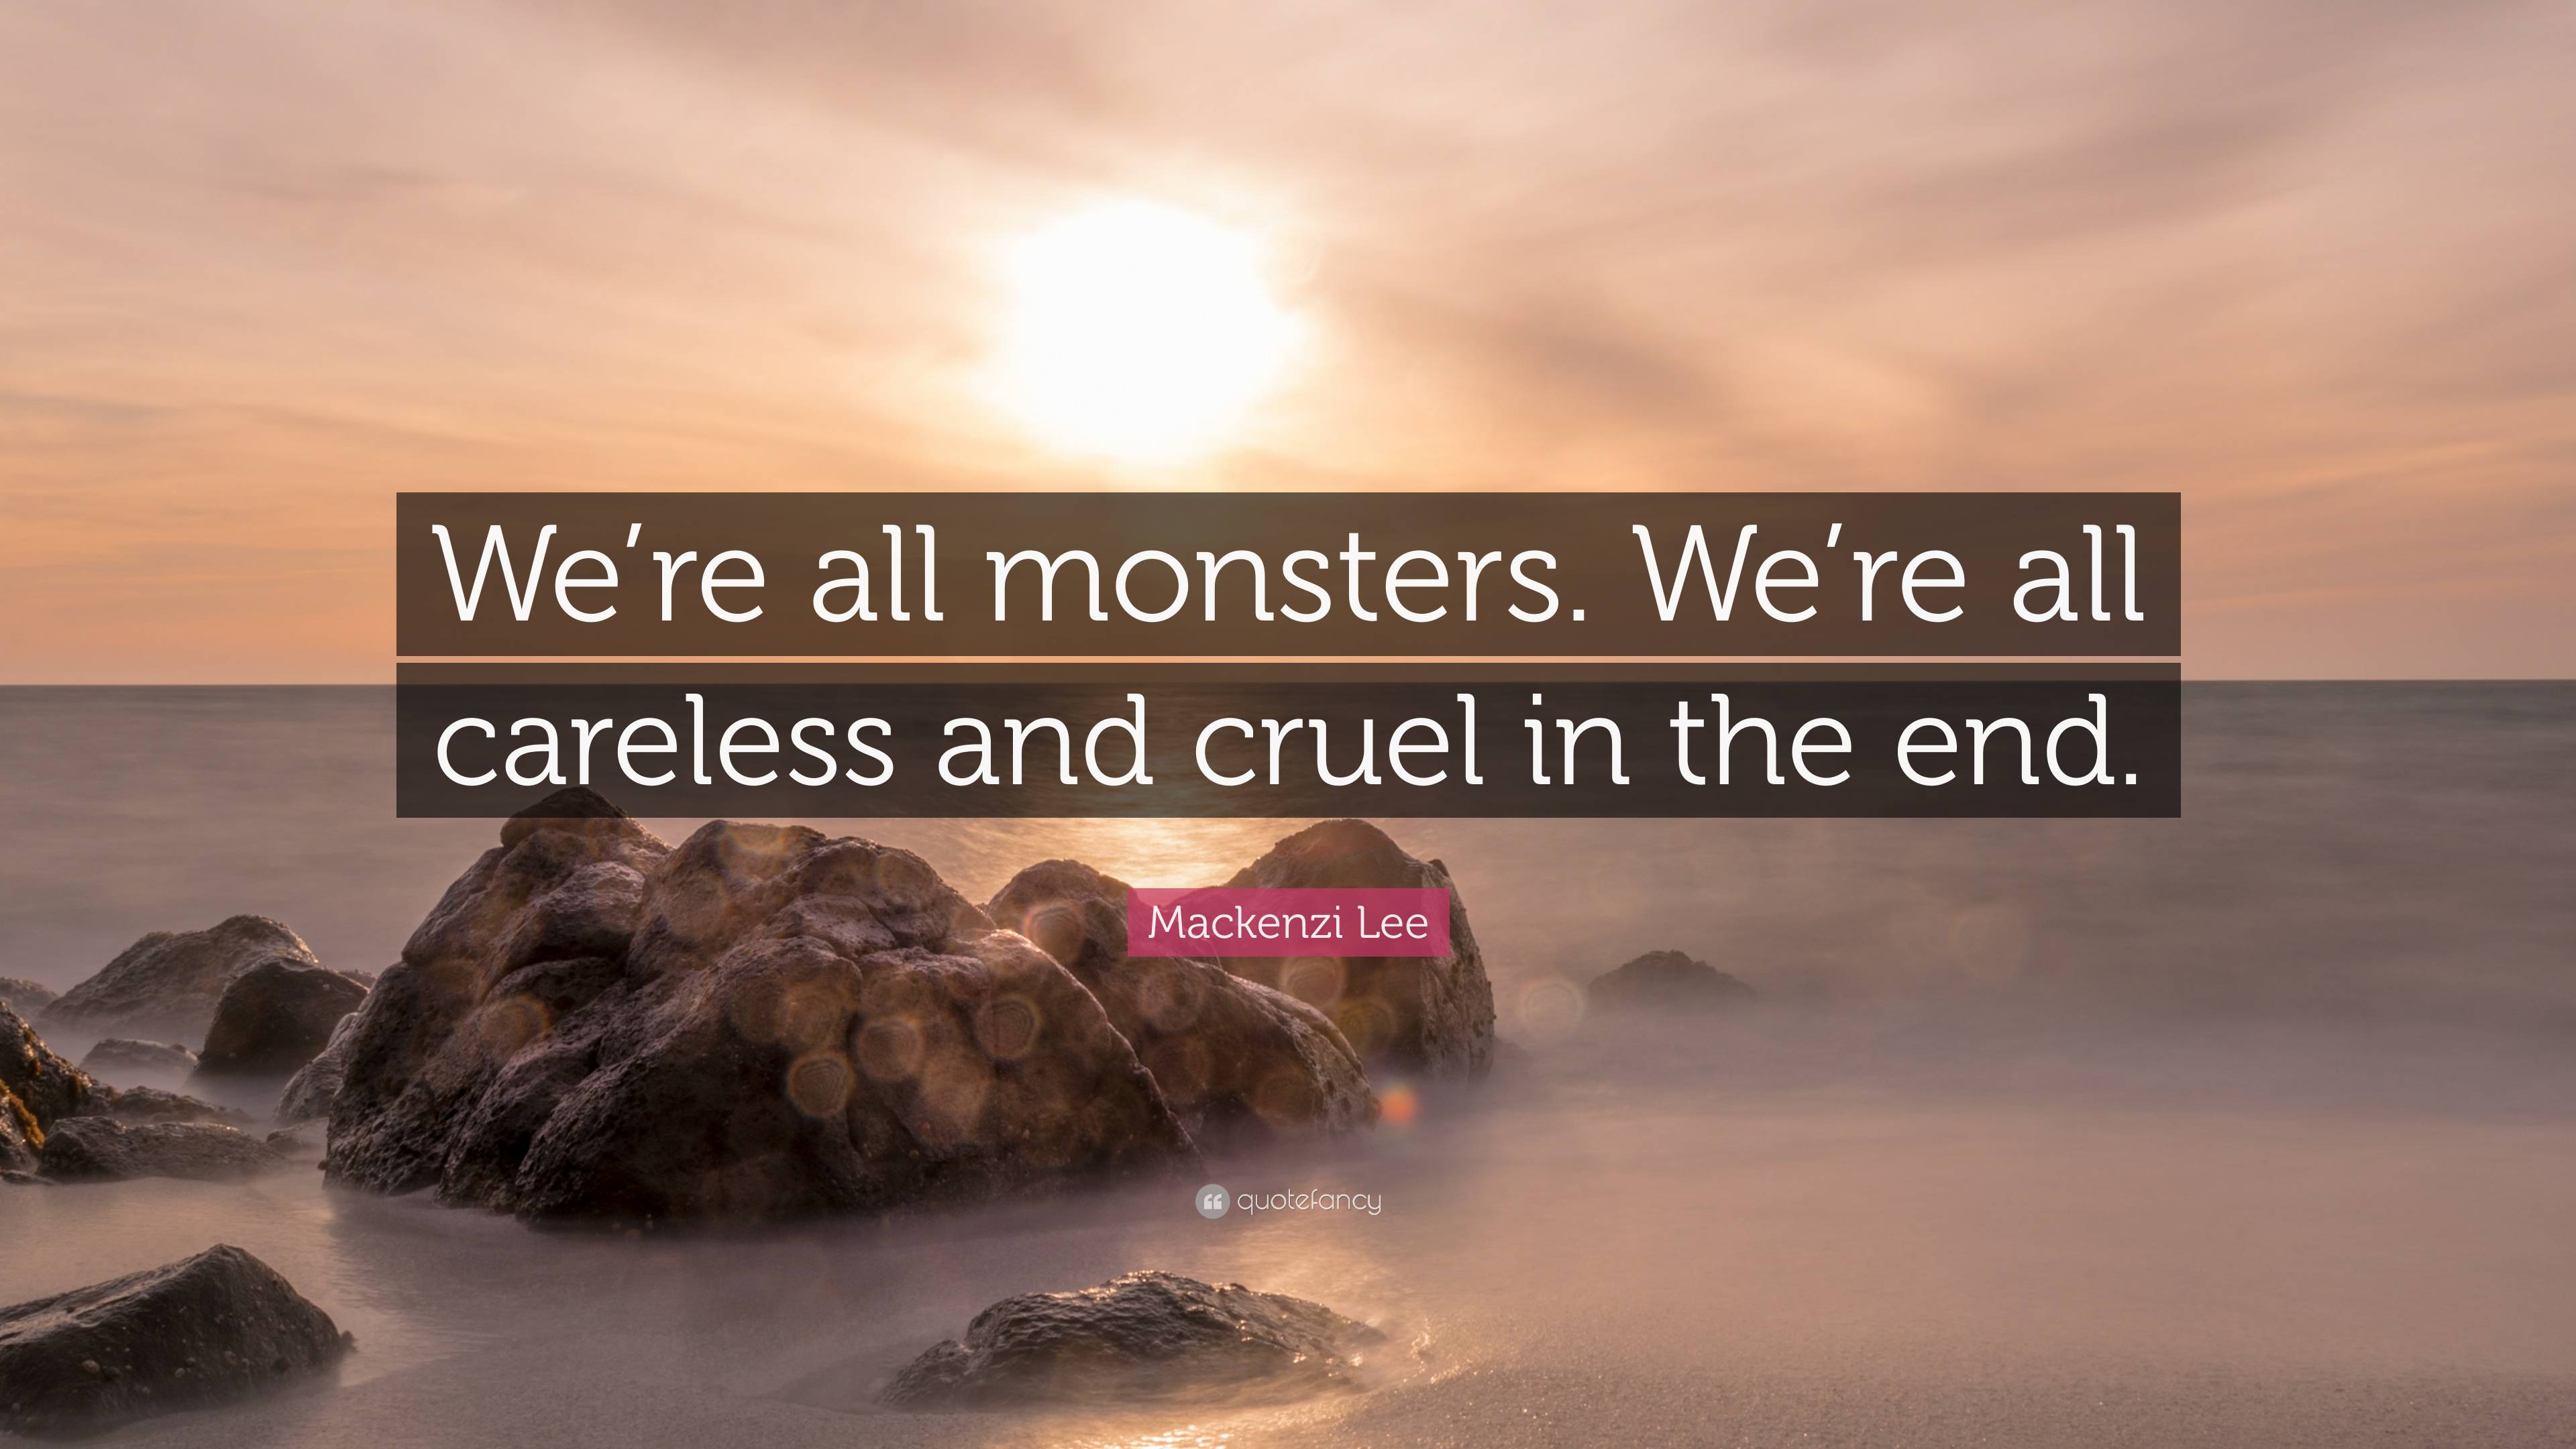 Mackenzi Lee Quote: “We're all monsters. We're all careless and cruel in  the end.”